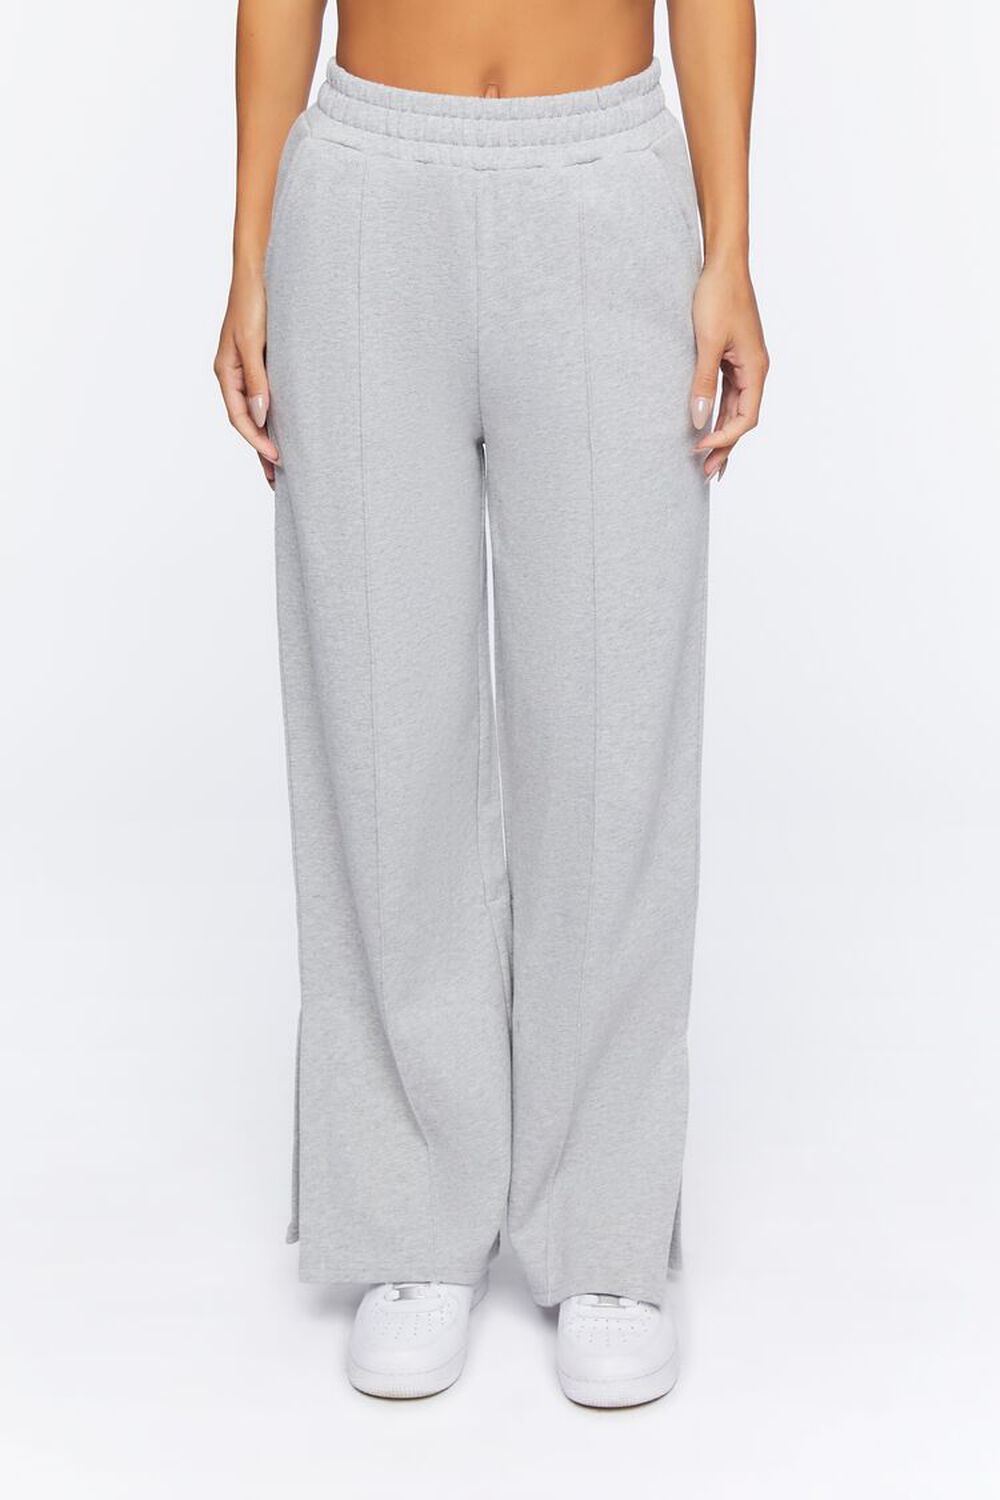 HEATHER GREY French Terry Wide-Leg Pants, image 2